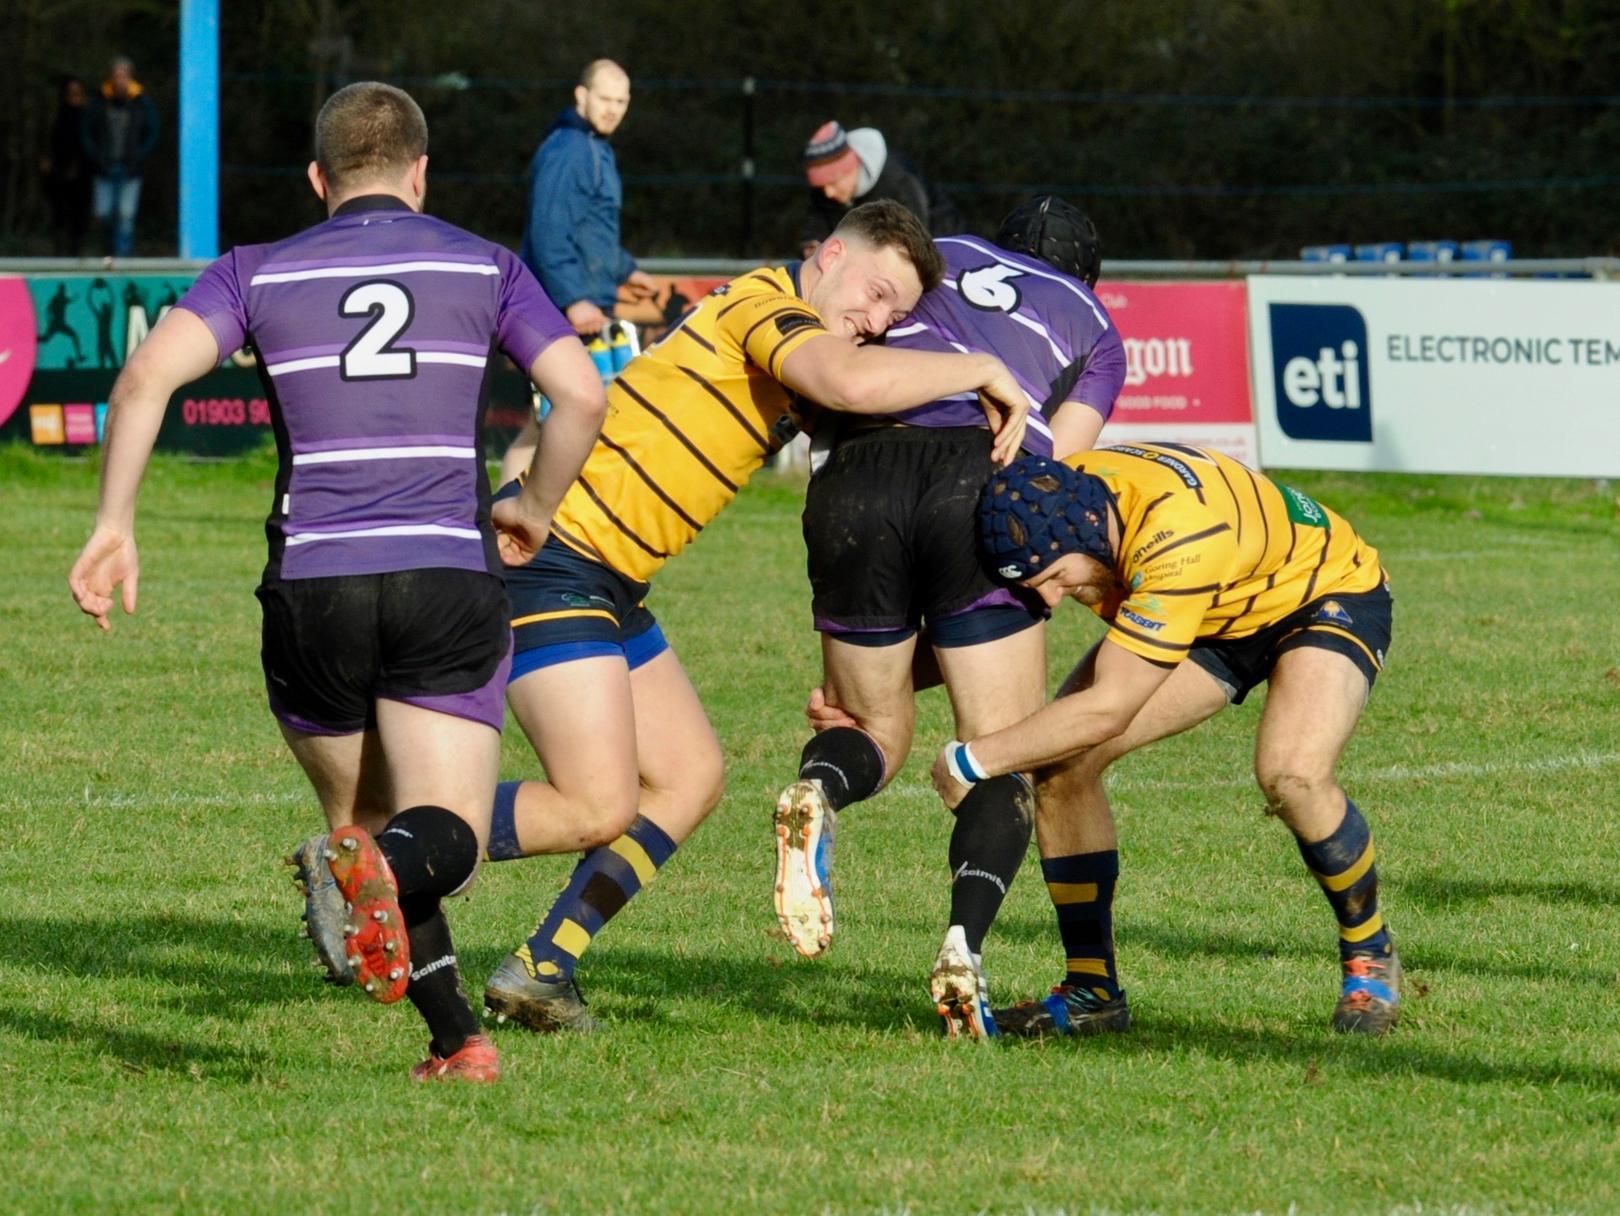 Action from Worthing Raiders v Leicester Lions